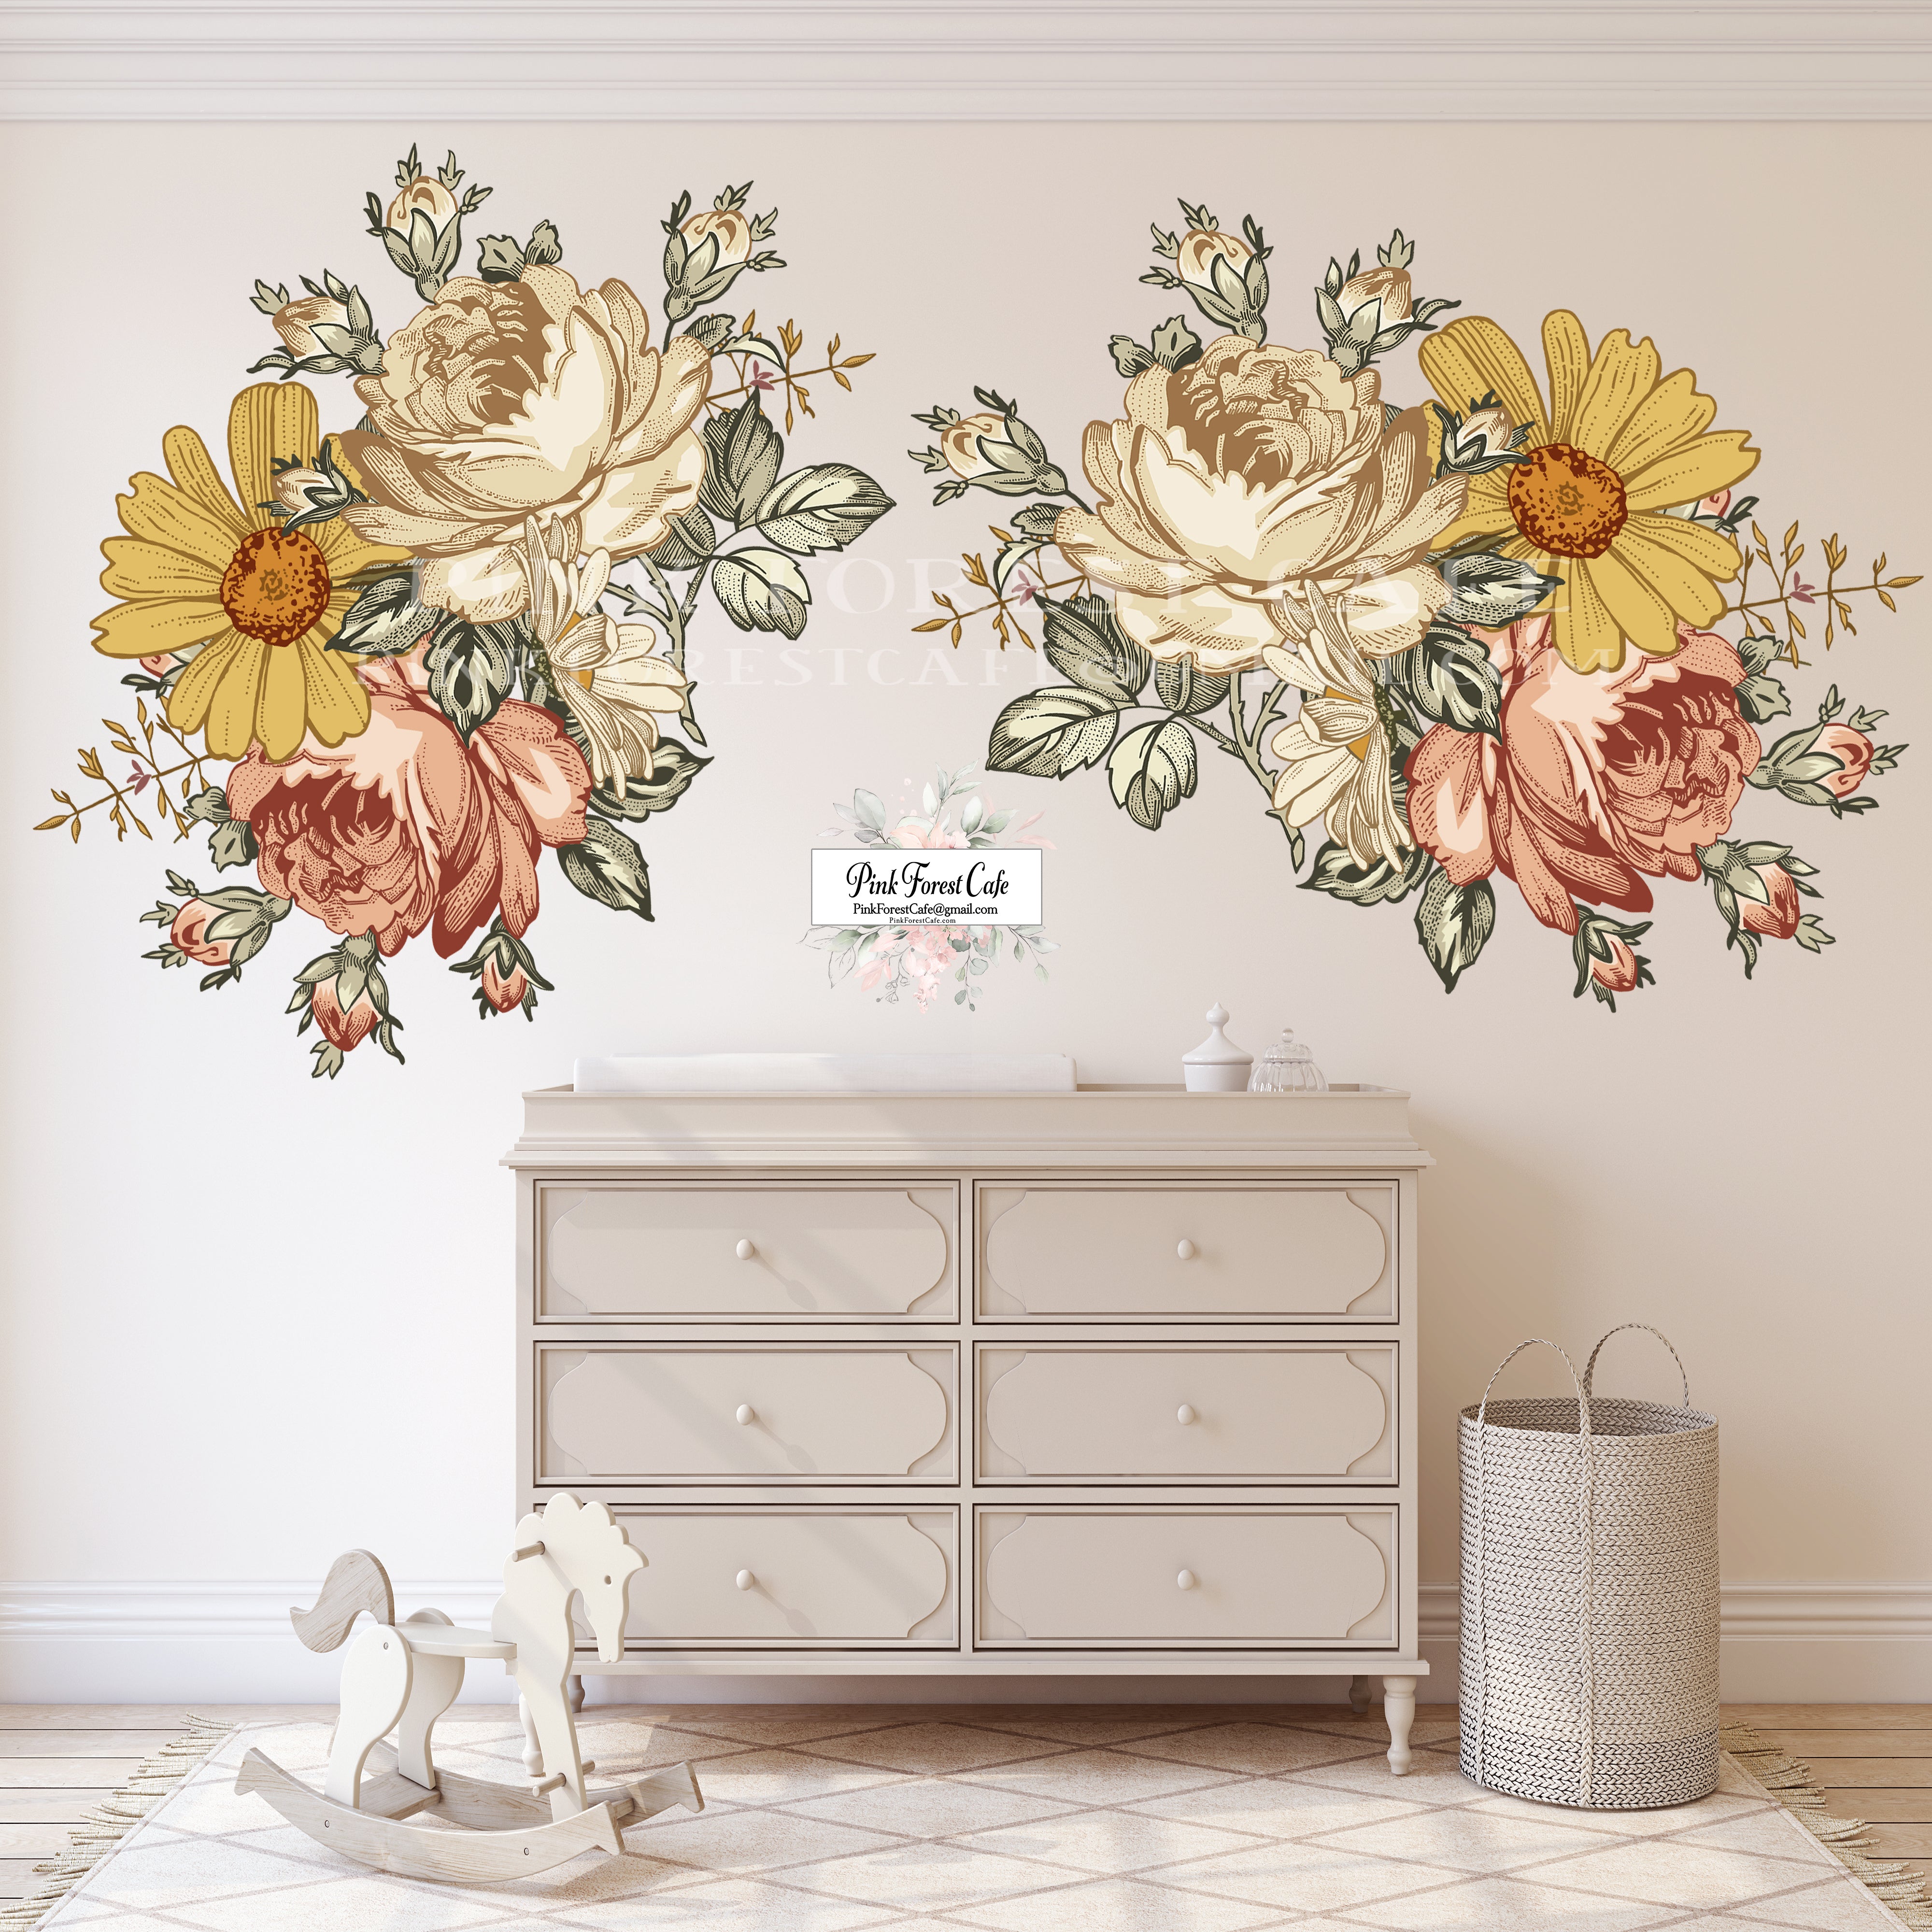 2 - 40 Vintage Rose Peony Wall Decal Sticker Floral Flower Decals Boho  Decor